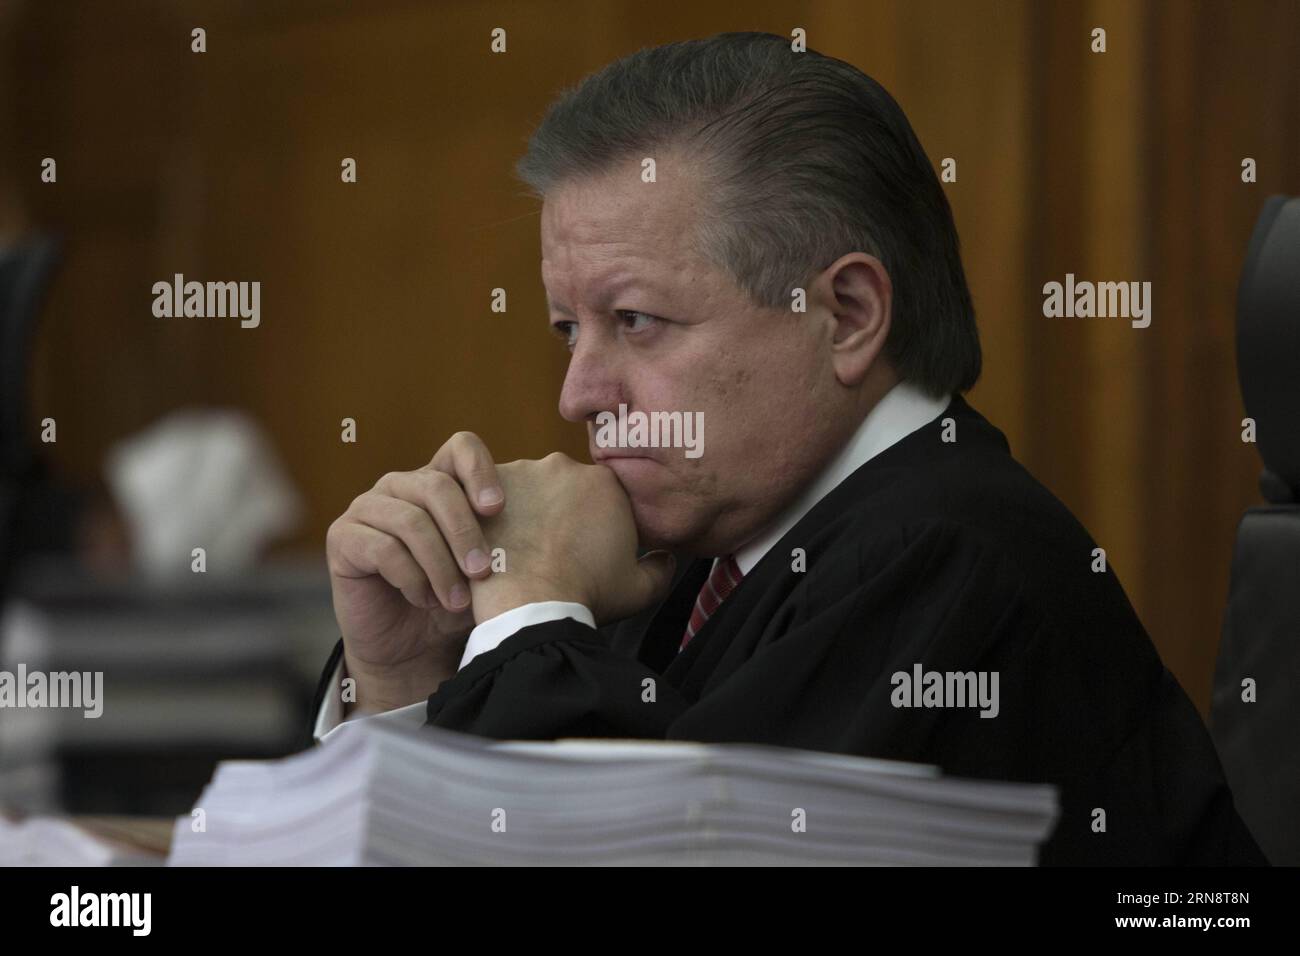 (151105) -- MEXICO CITY, Nov. 4, 2015 -- Supreme Court judge Arturo Zaldivar attends a session of the Supreme Court in Mexico City, capital of Mexico, on Nov. 4, 2015. Mexico s National Supreme Court of Justice approved a ruling of the cultivation, processing and personal consumption of marijuana with recreational and entertainment purposes on Wednesday. Alejandro Ayala) MEXICO-MEXICO CITY-MARIJUANA-SUPREME COURT e AlejandroxAyala PUBLICATIONxNOTxINxCHN Mexiko: Oberstes Gericht erlaubt Marihuana-Konsum   Mexico City Nov 4 2015 Supreme Court Judge Arturo Zaldivar Attends a Session of The Suprem Stock Photo